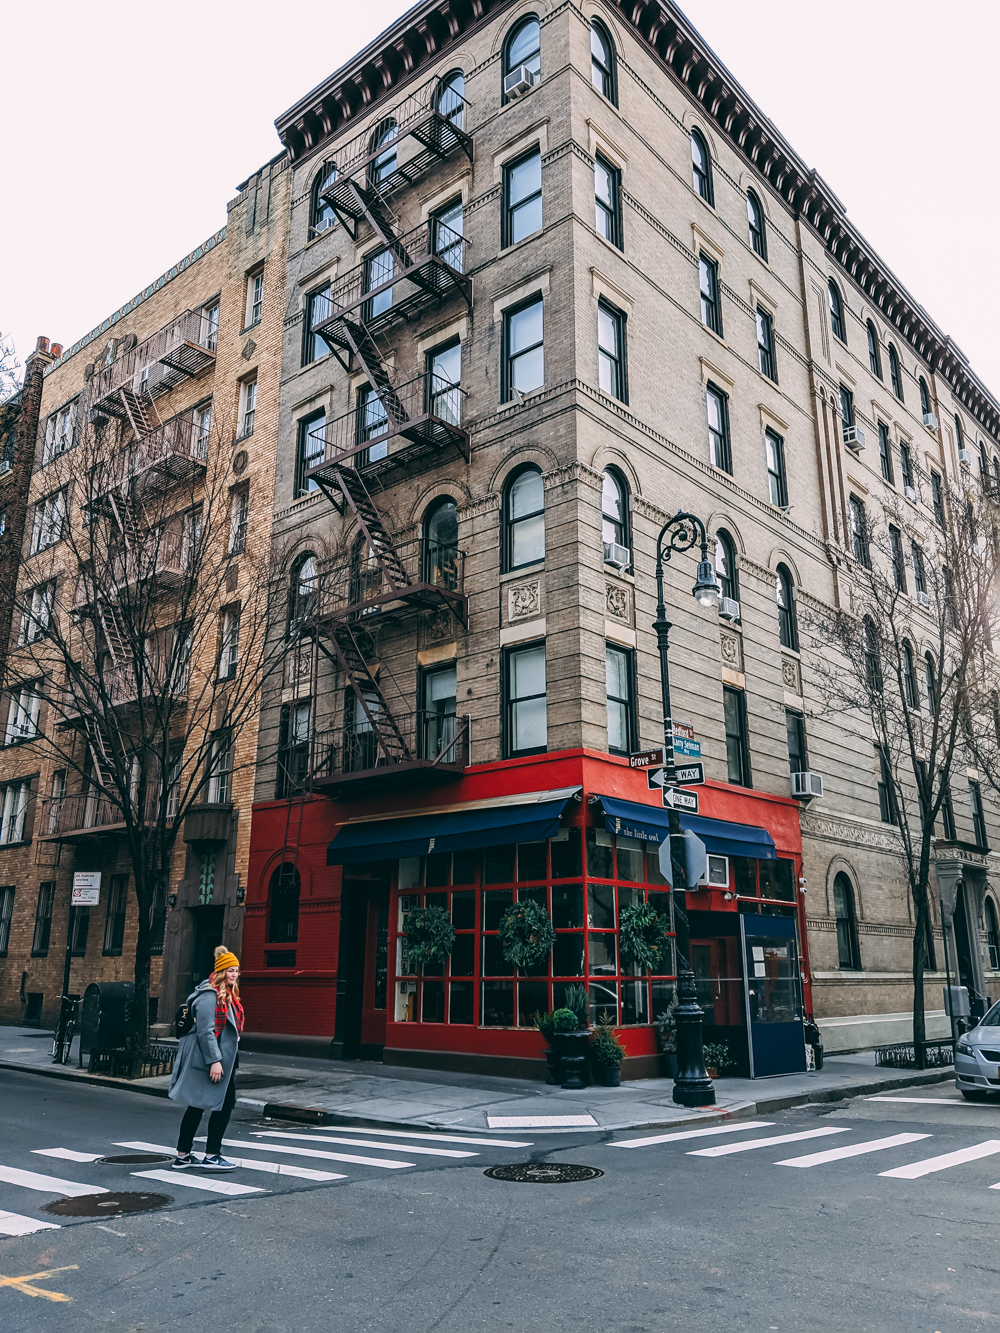 How to Find the Friends Apartment Building in NYC 